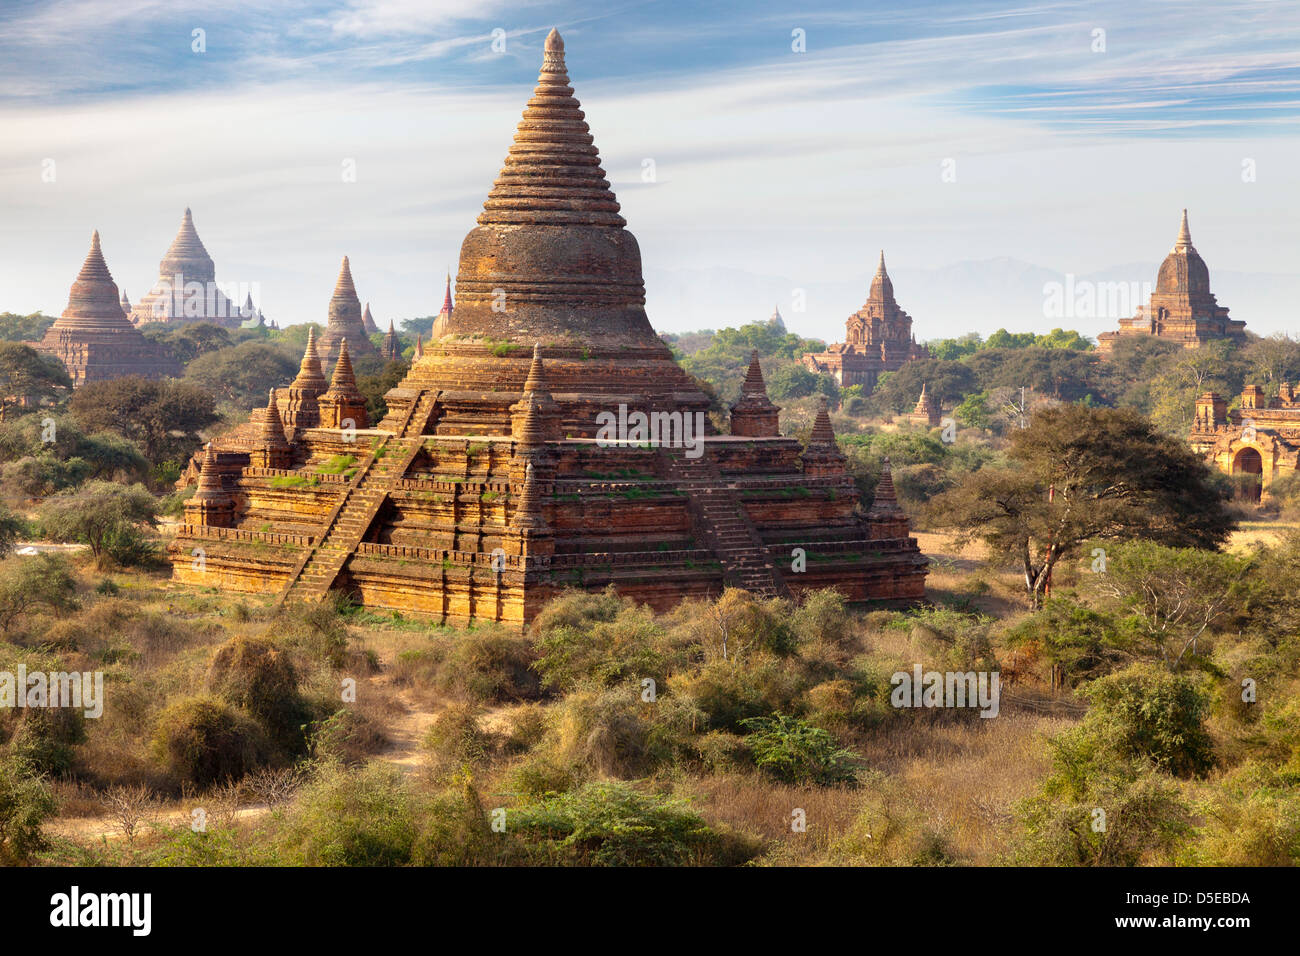 The Temples and Pagodas of Bagan, Myanmar - early morning 3 Stock Photo